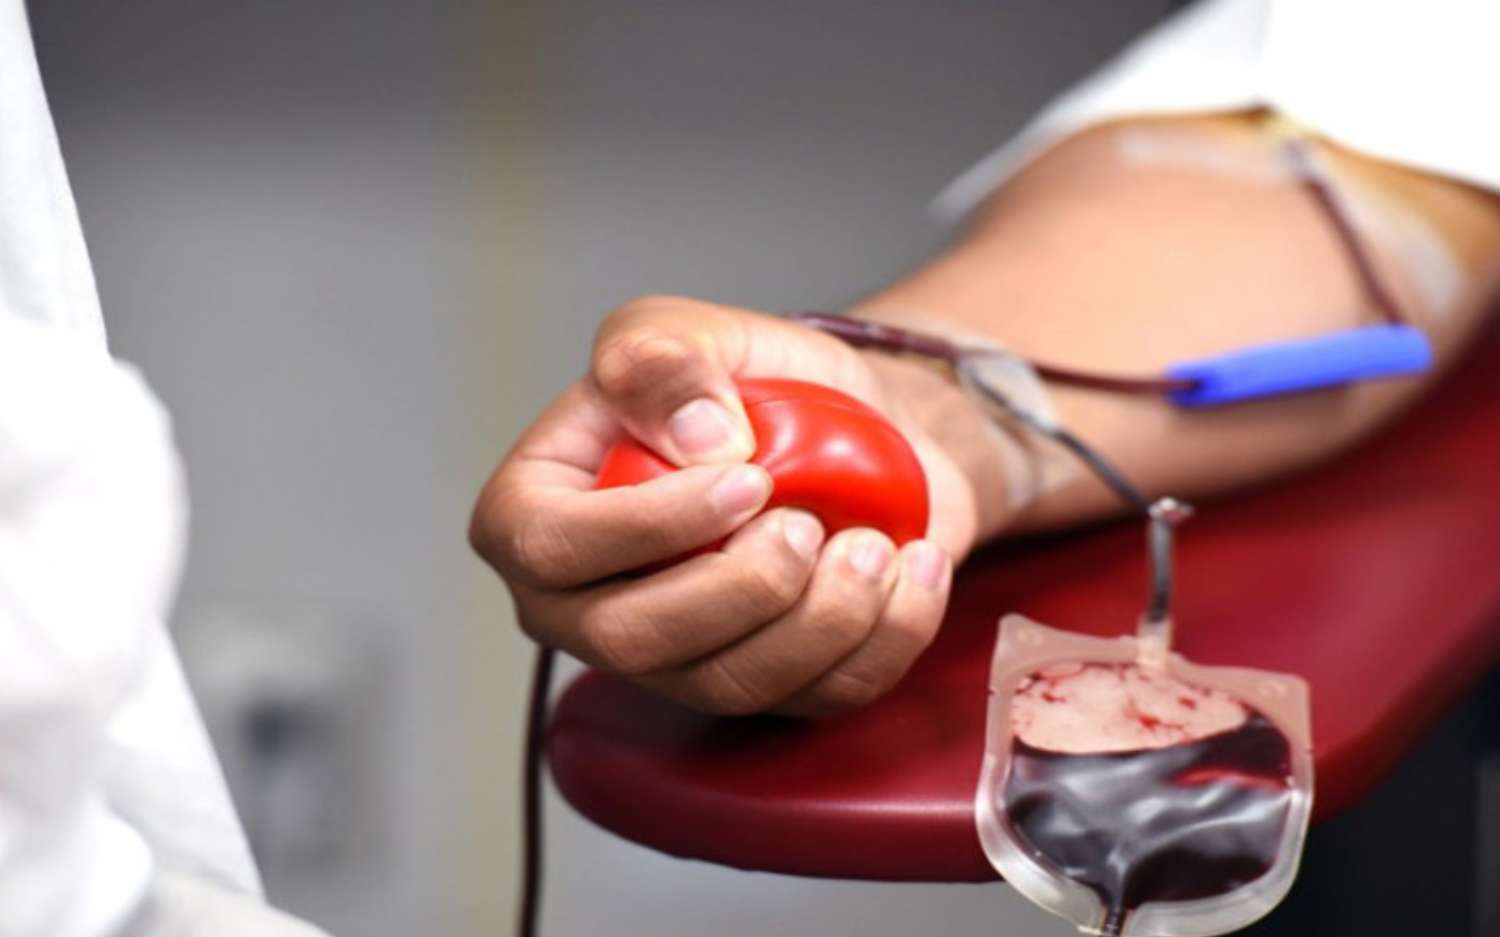 Prime Commercial Bank Organizes Blood Donation to Mark Its 17th Anniversary